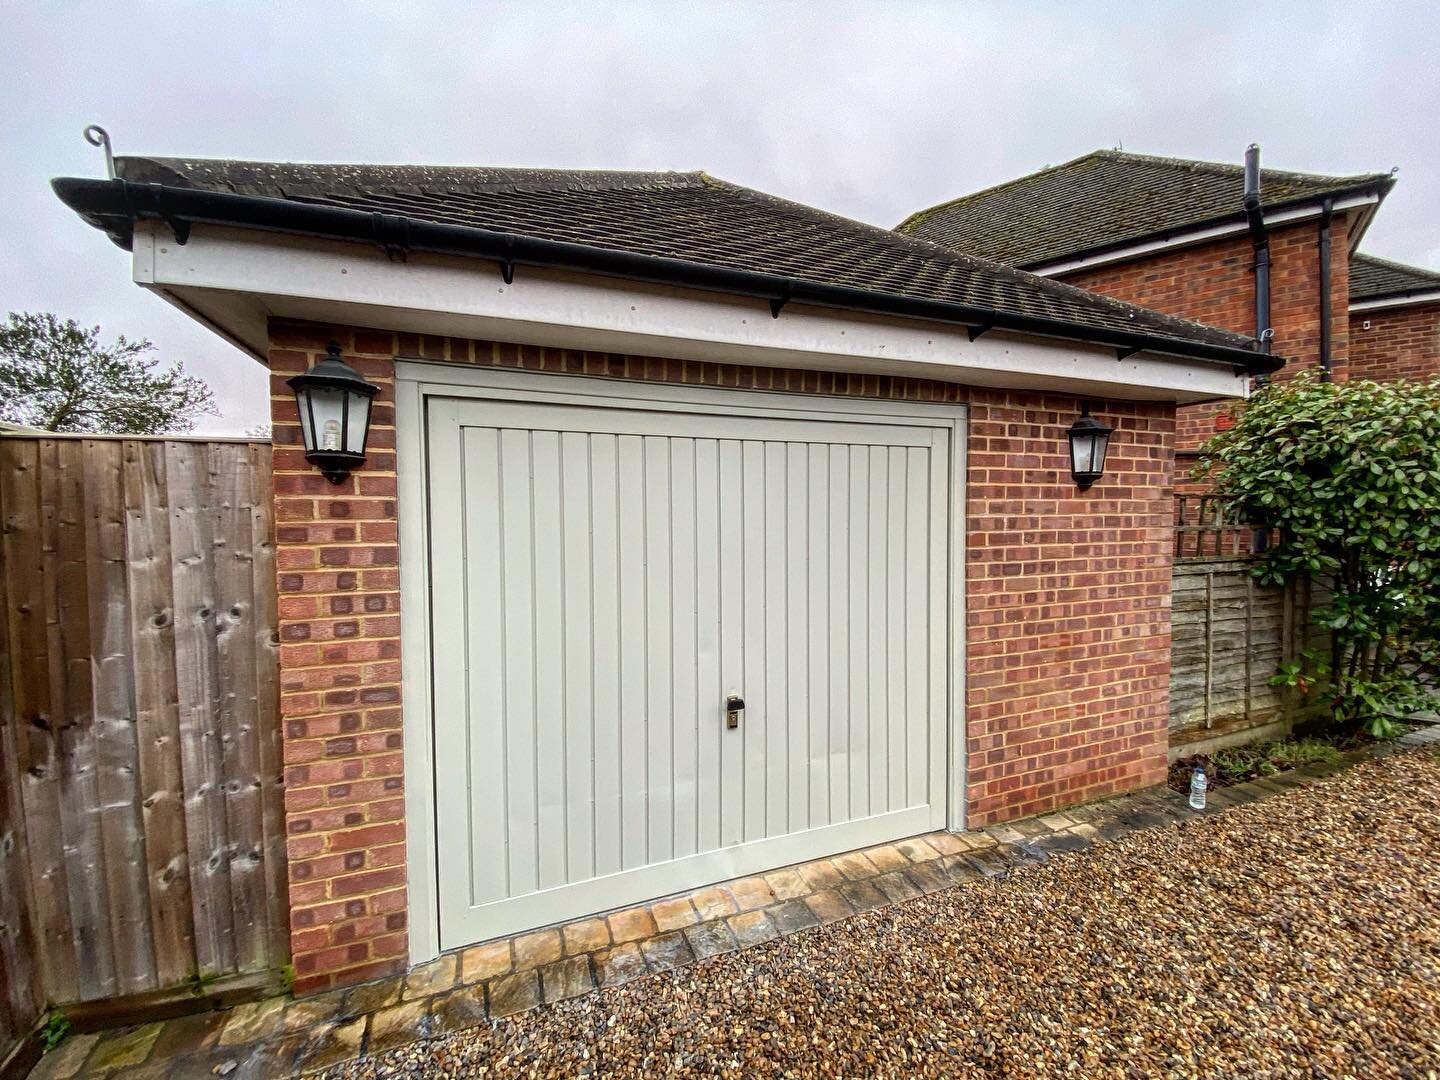 We absolutely love this colour! 😍👏🏽 This garage door was transformed today by spraying it to Farrow &amp; Ball &lsquo;Blue Gray&rsquo;, adding a lot of character! This property now definitely pops with this bold and bright colour way. 🎨💎

💵 - U